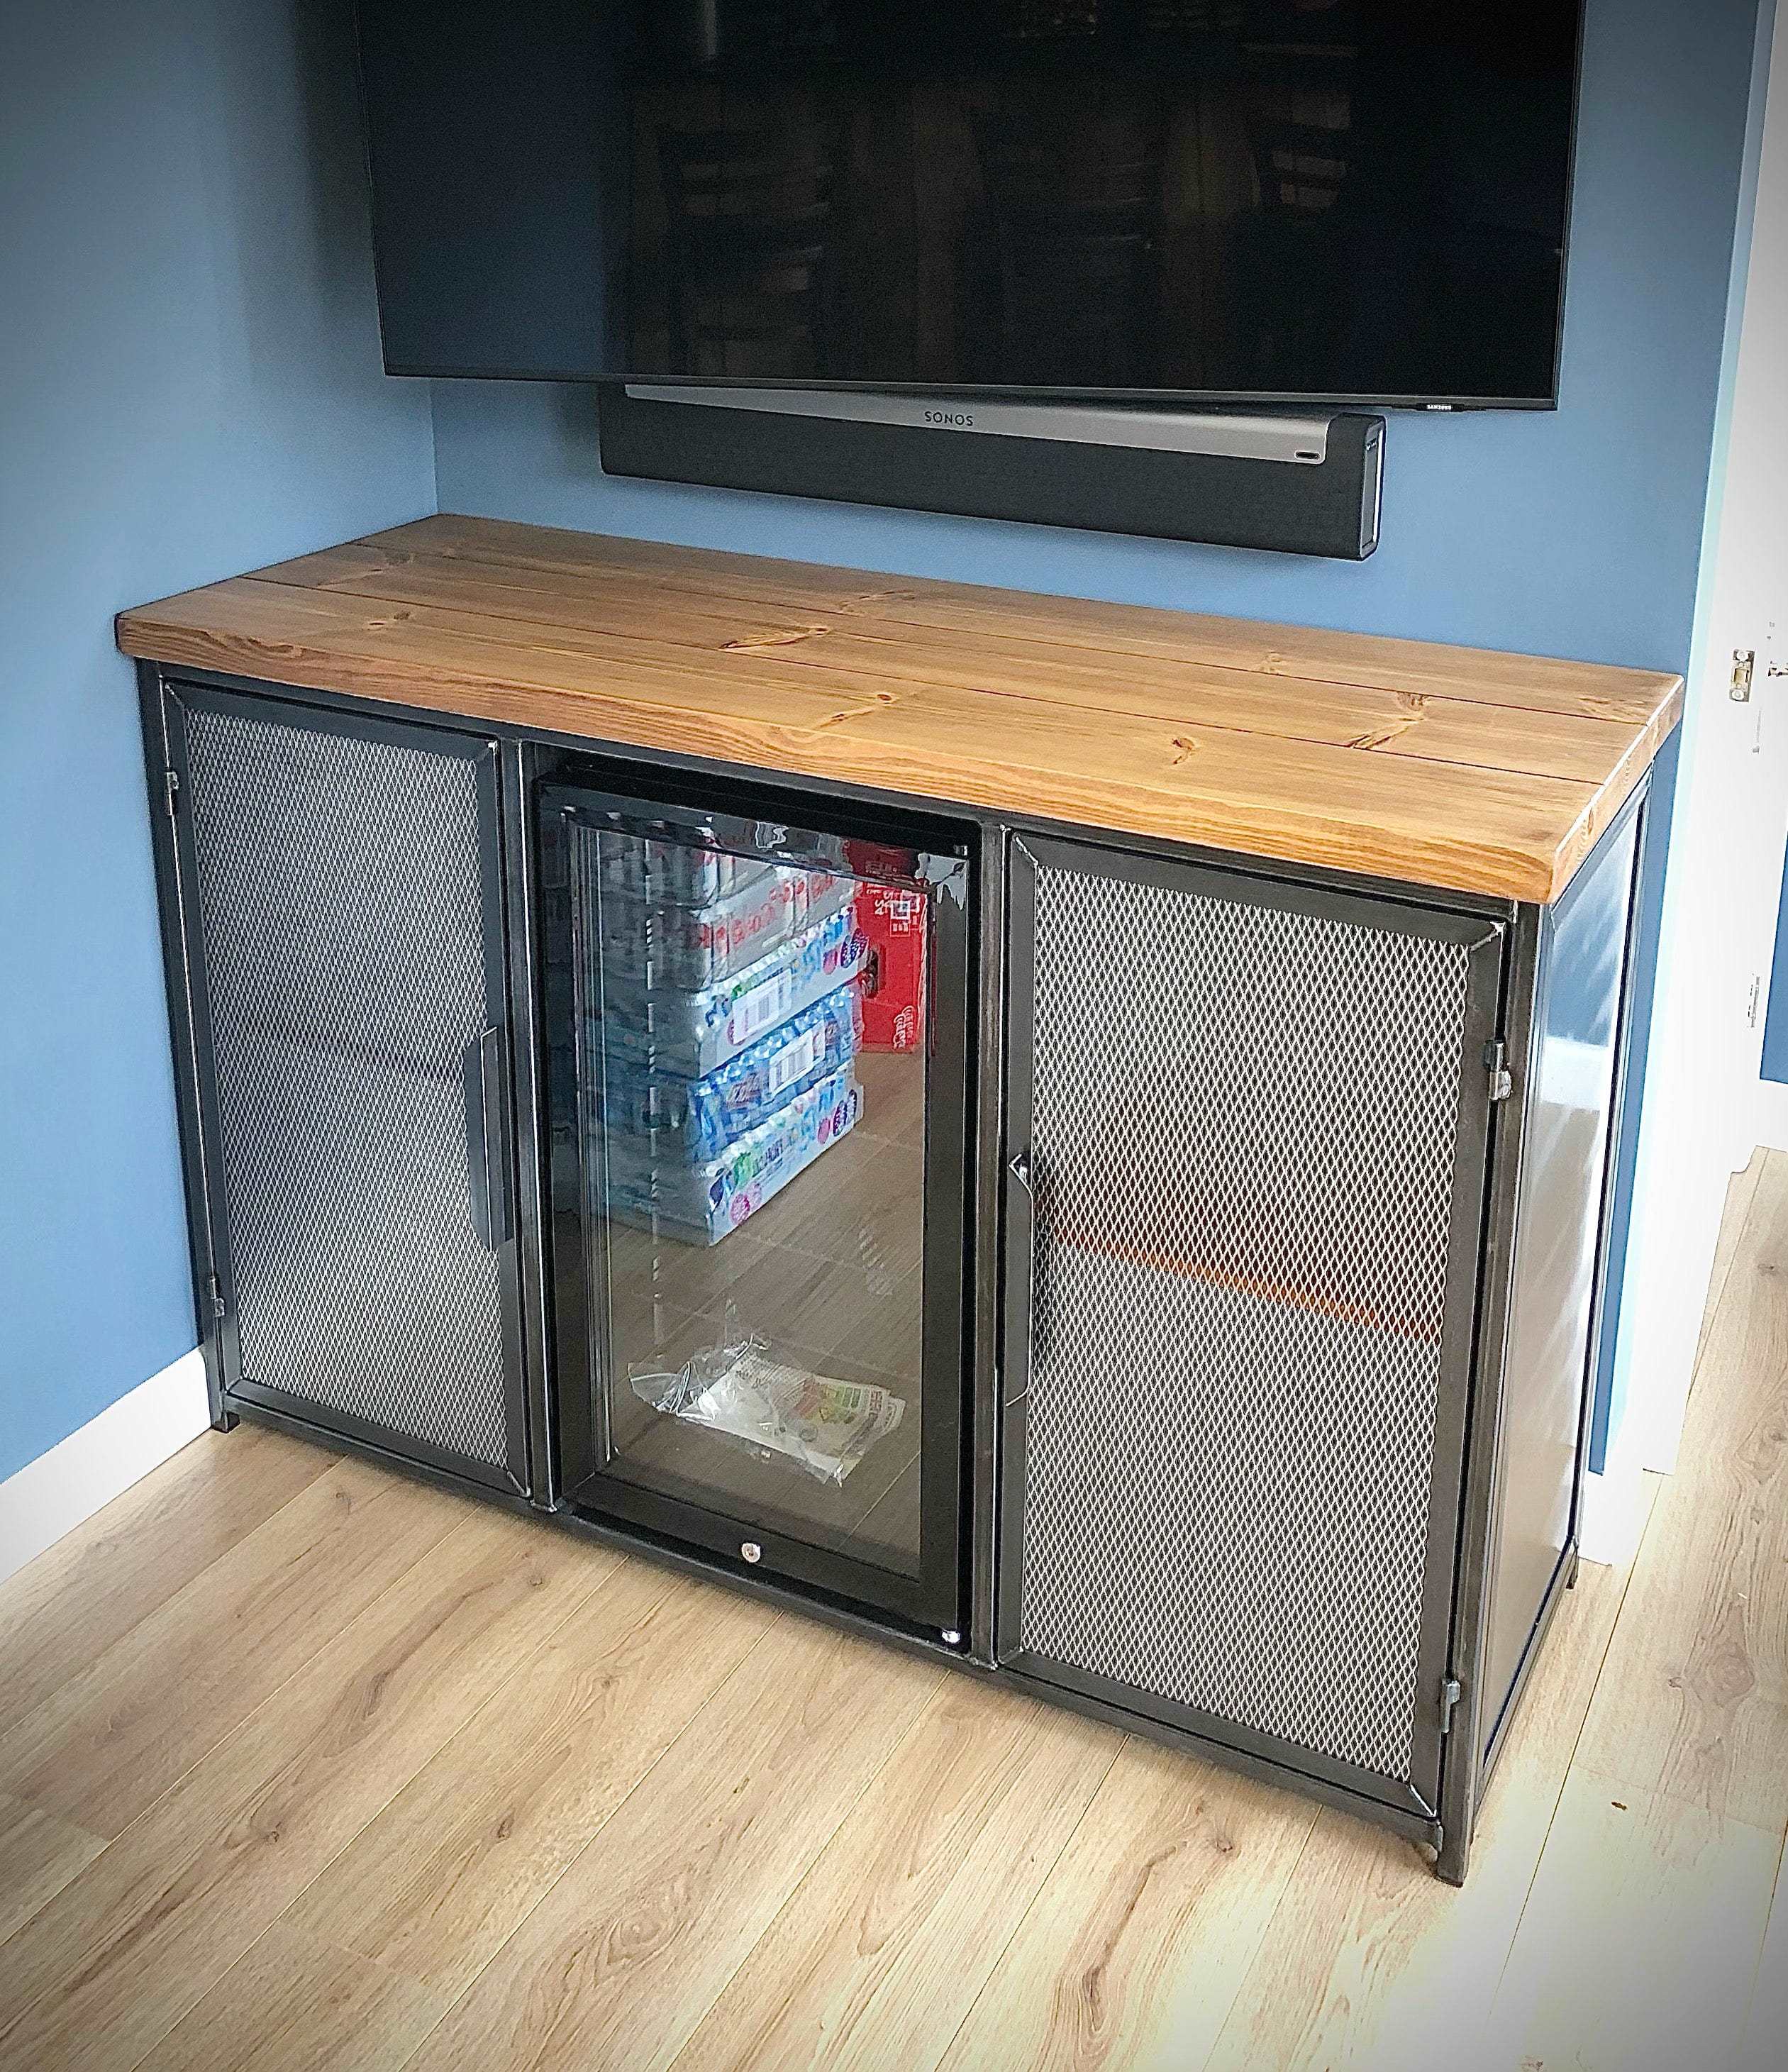 Industrial Drinks Cabinet Sideboard With Integrated Beer Fridge Sideboards and drinks cabinet RSD Furniture   